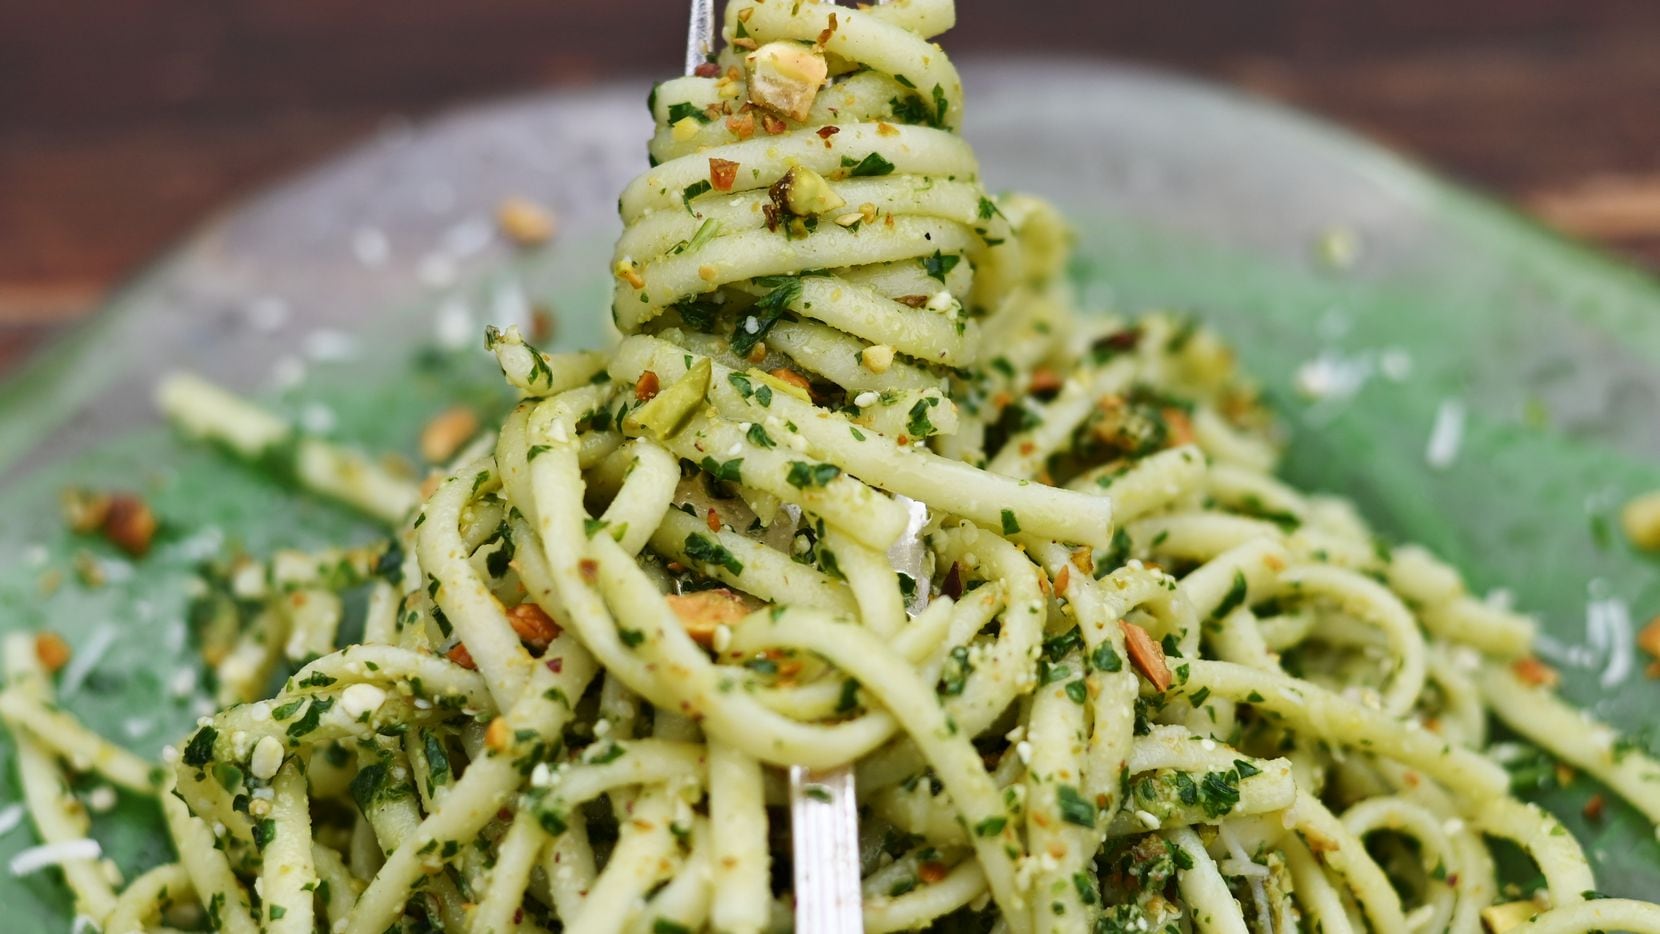 Pistachio Lemon Pesto can be served on your pasta of choice.